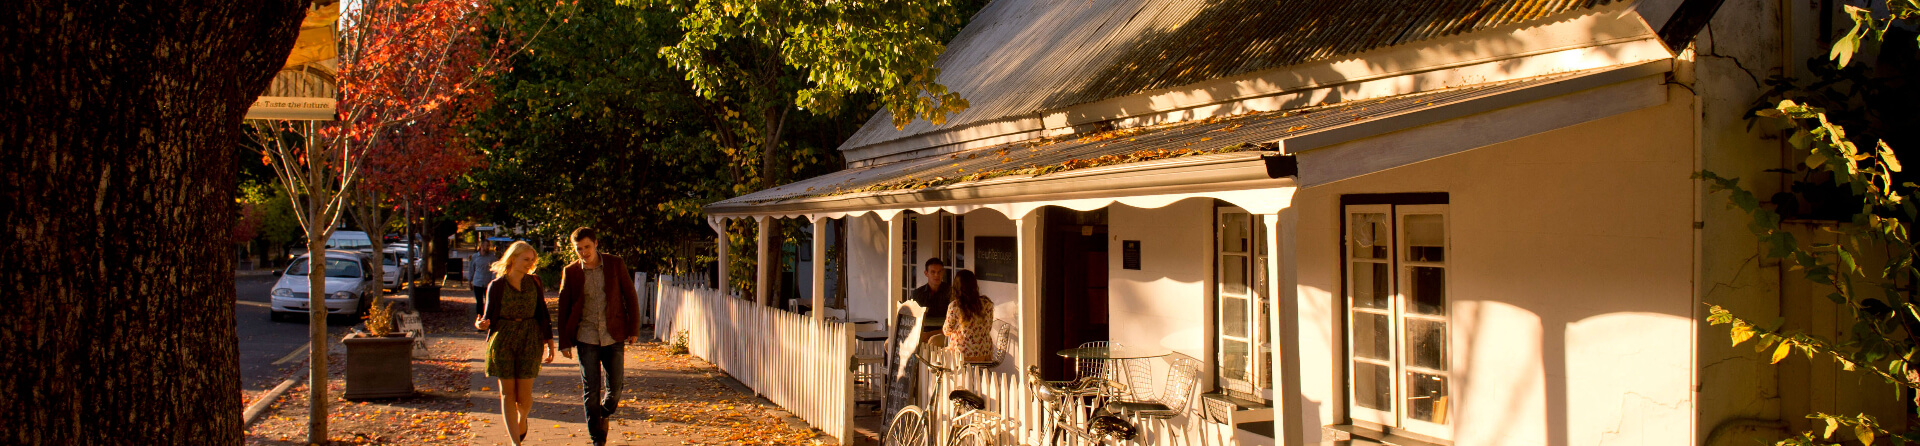 When is the best time to visit Hahndorf?